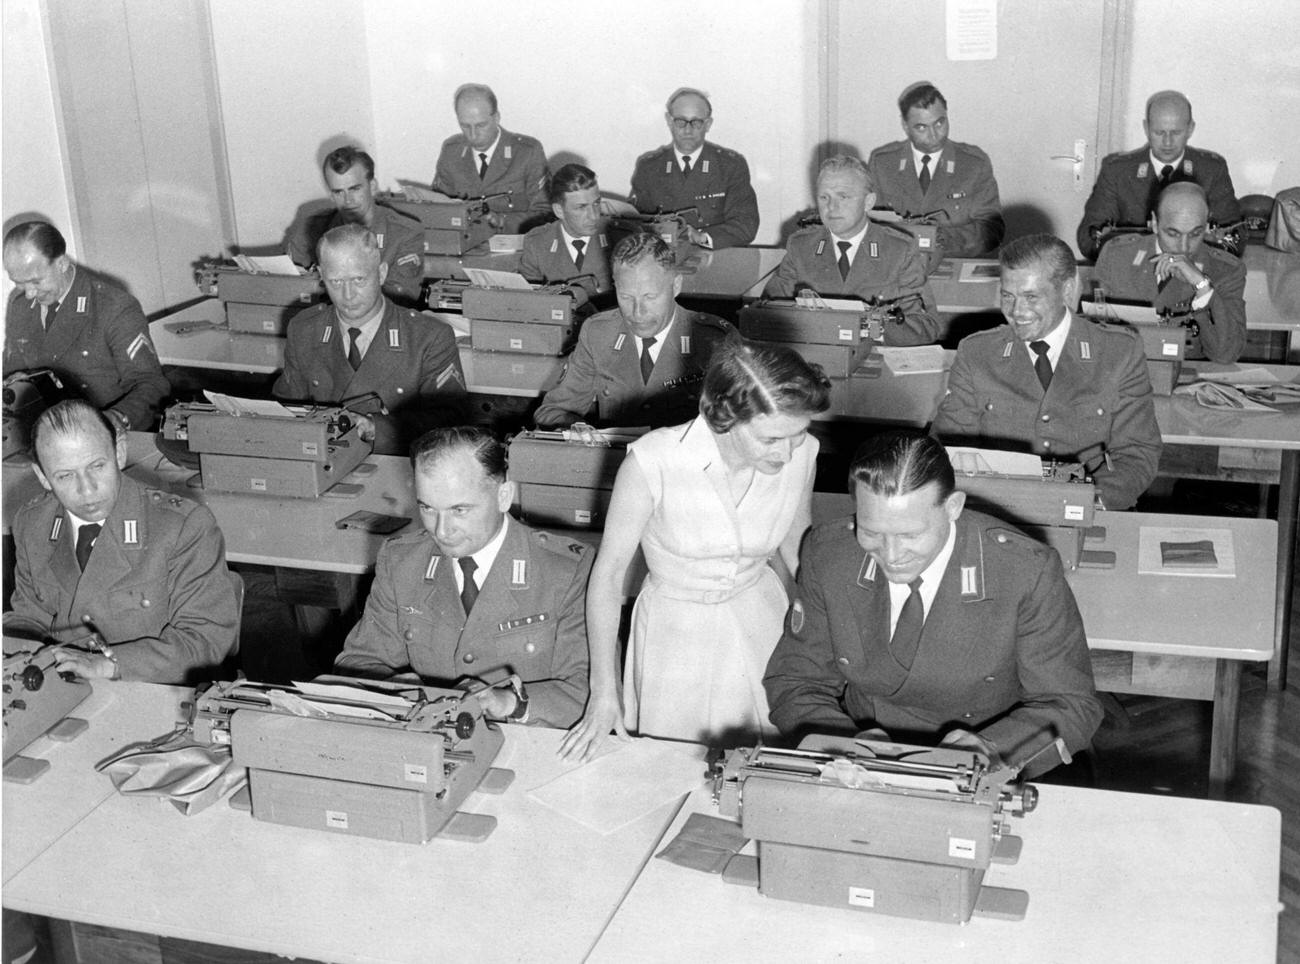 Typing Lesson at German Armed Forces College, Stuttgart, 1958